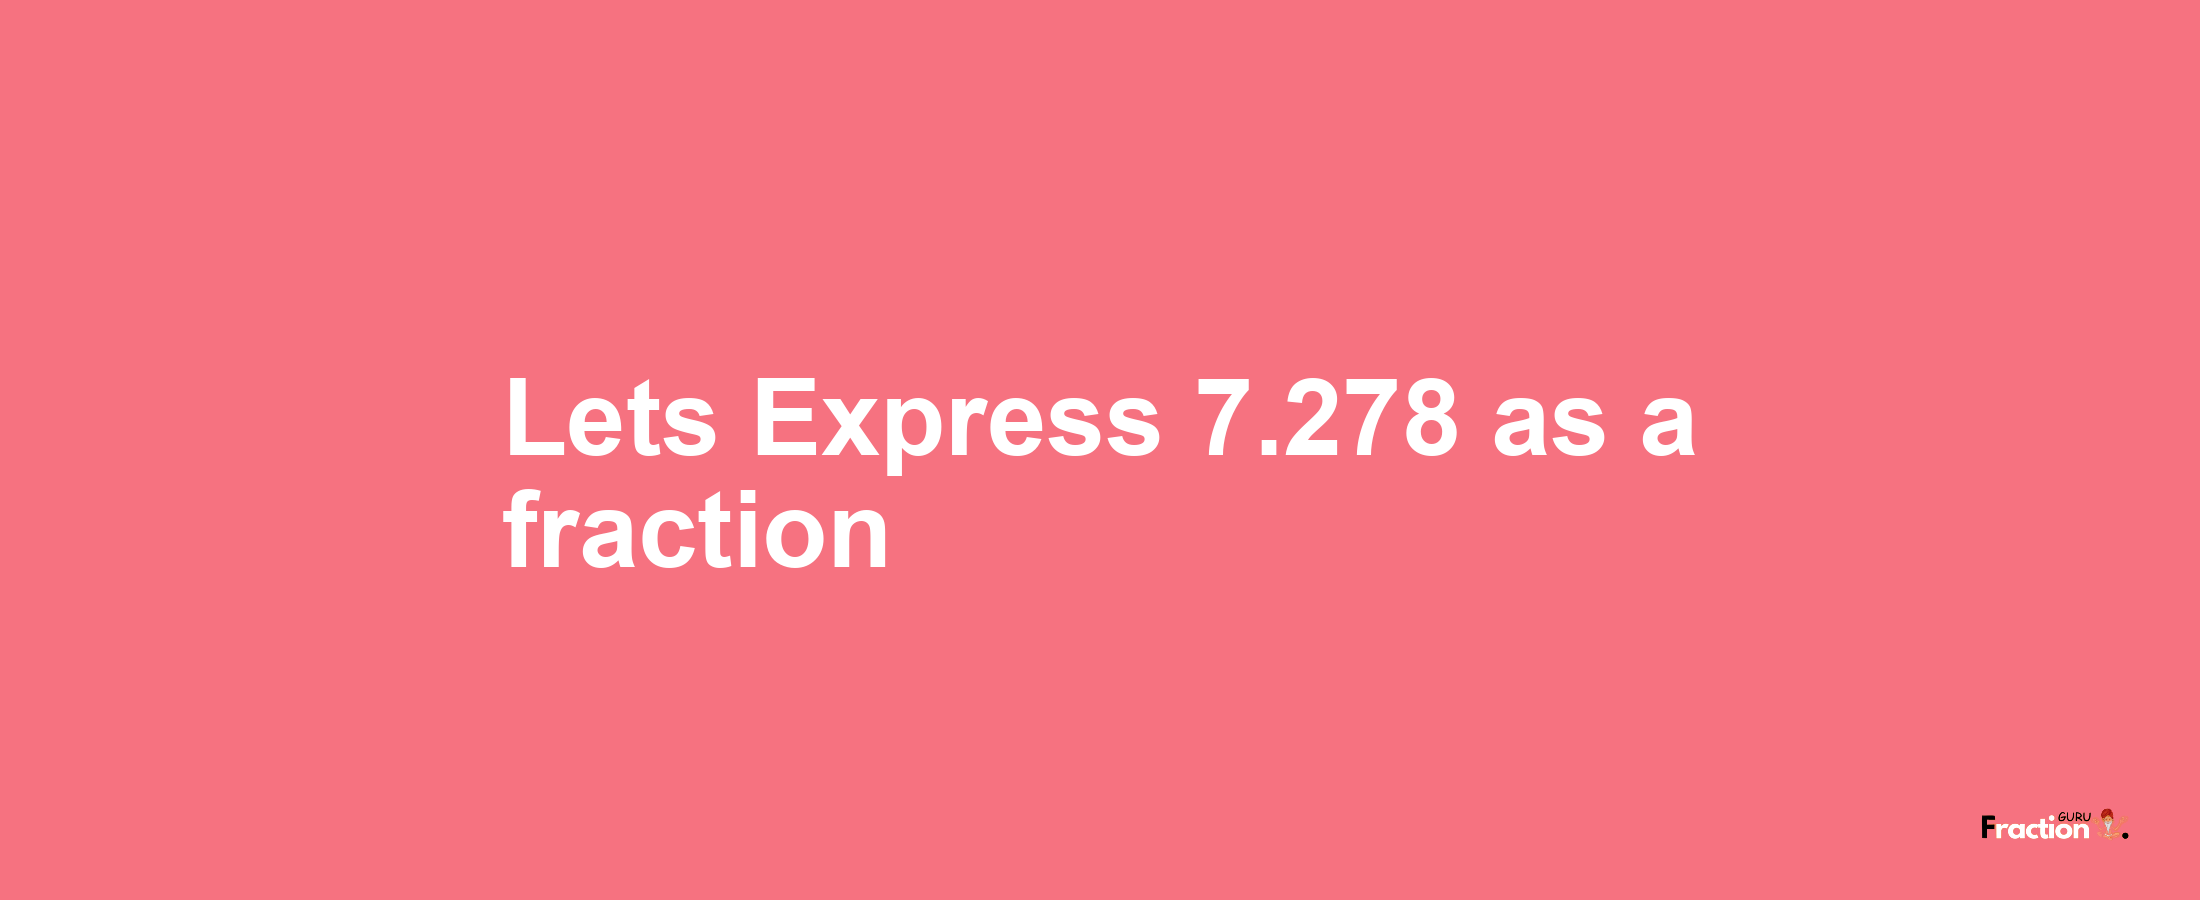 Lets Express 7.278 as afraction